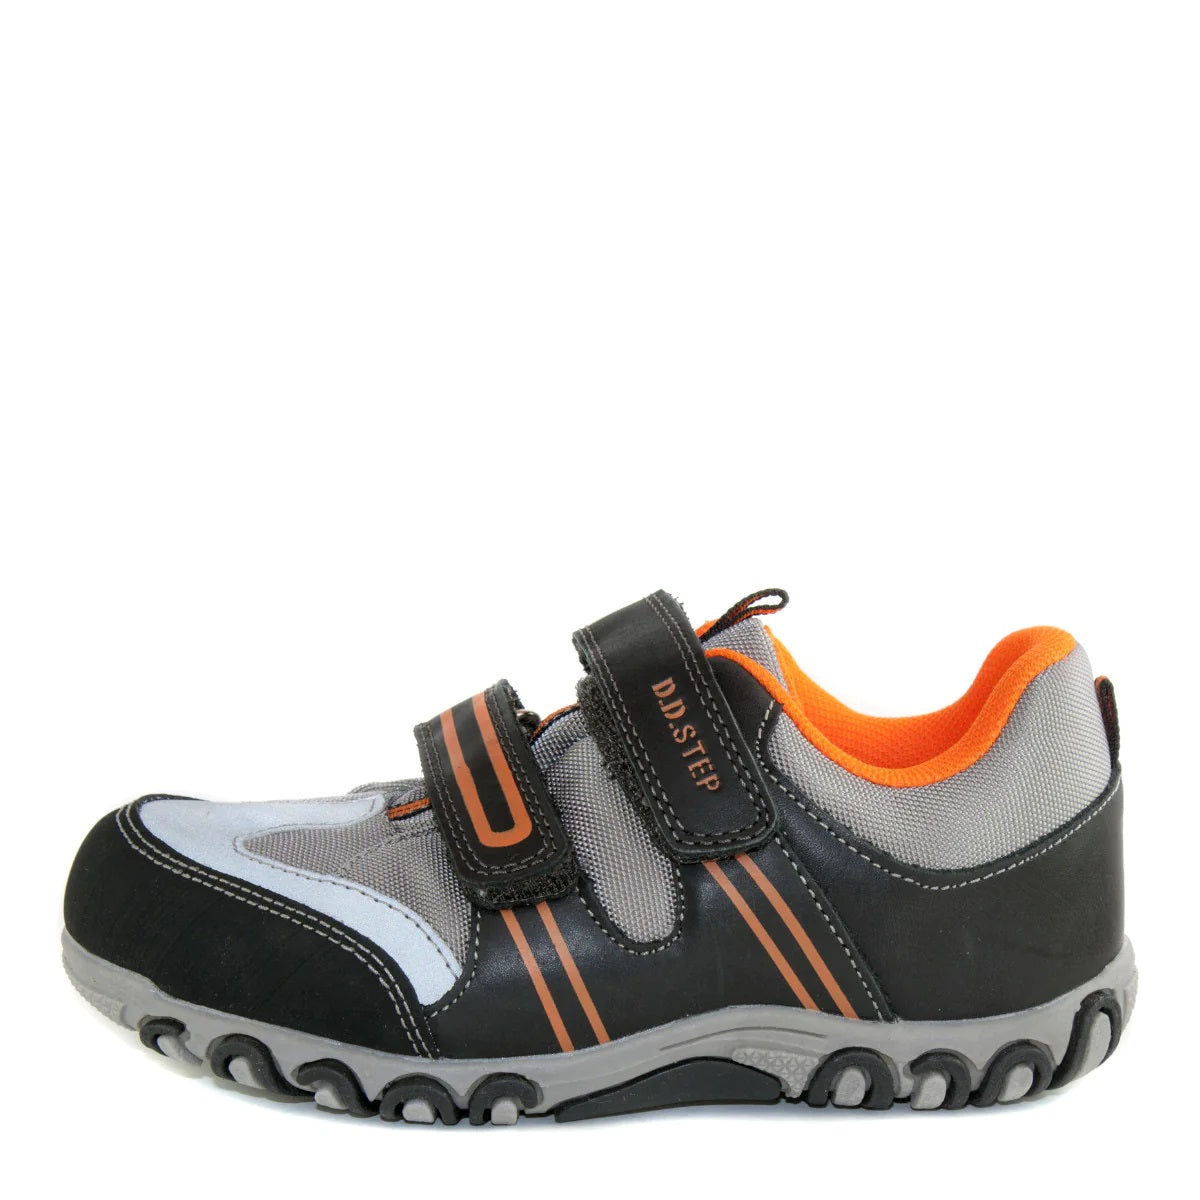 Premium quality shoes made of waterproof material and genuine leather in black and orange color and double velcro strap. Thanks to its high level of specialization, D.D. Step knows exactly what your child’s feet need, to develop properly in the various phases of growth. The exceptional comfort these shoes provide assure the well-being and happiness of your child.